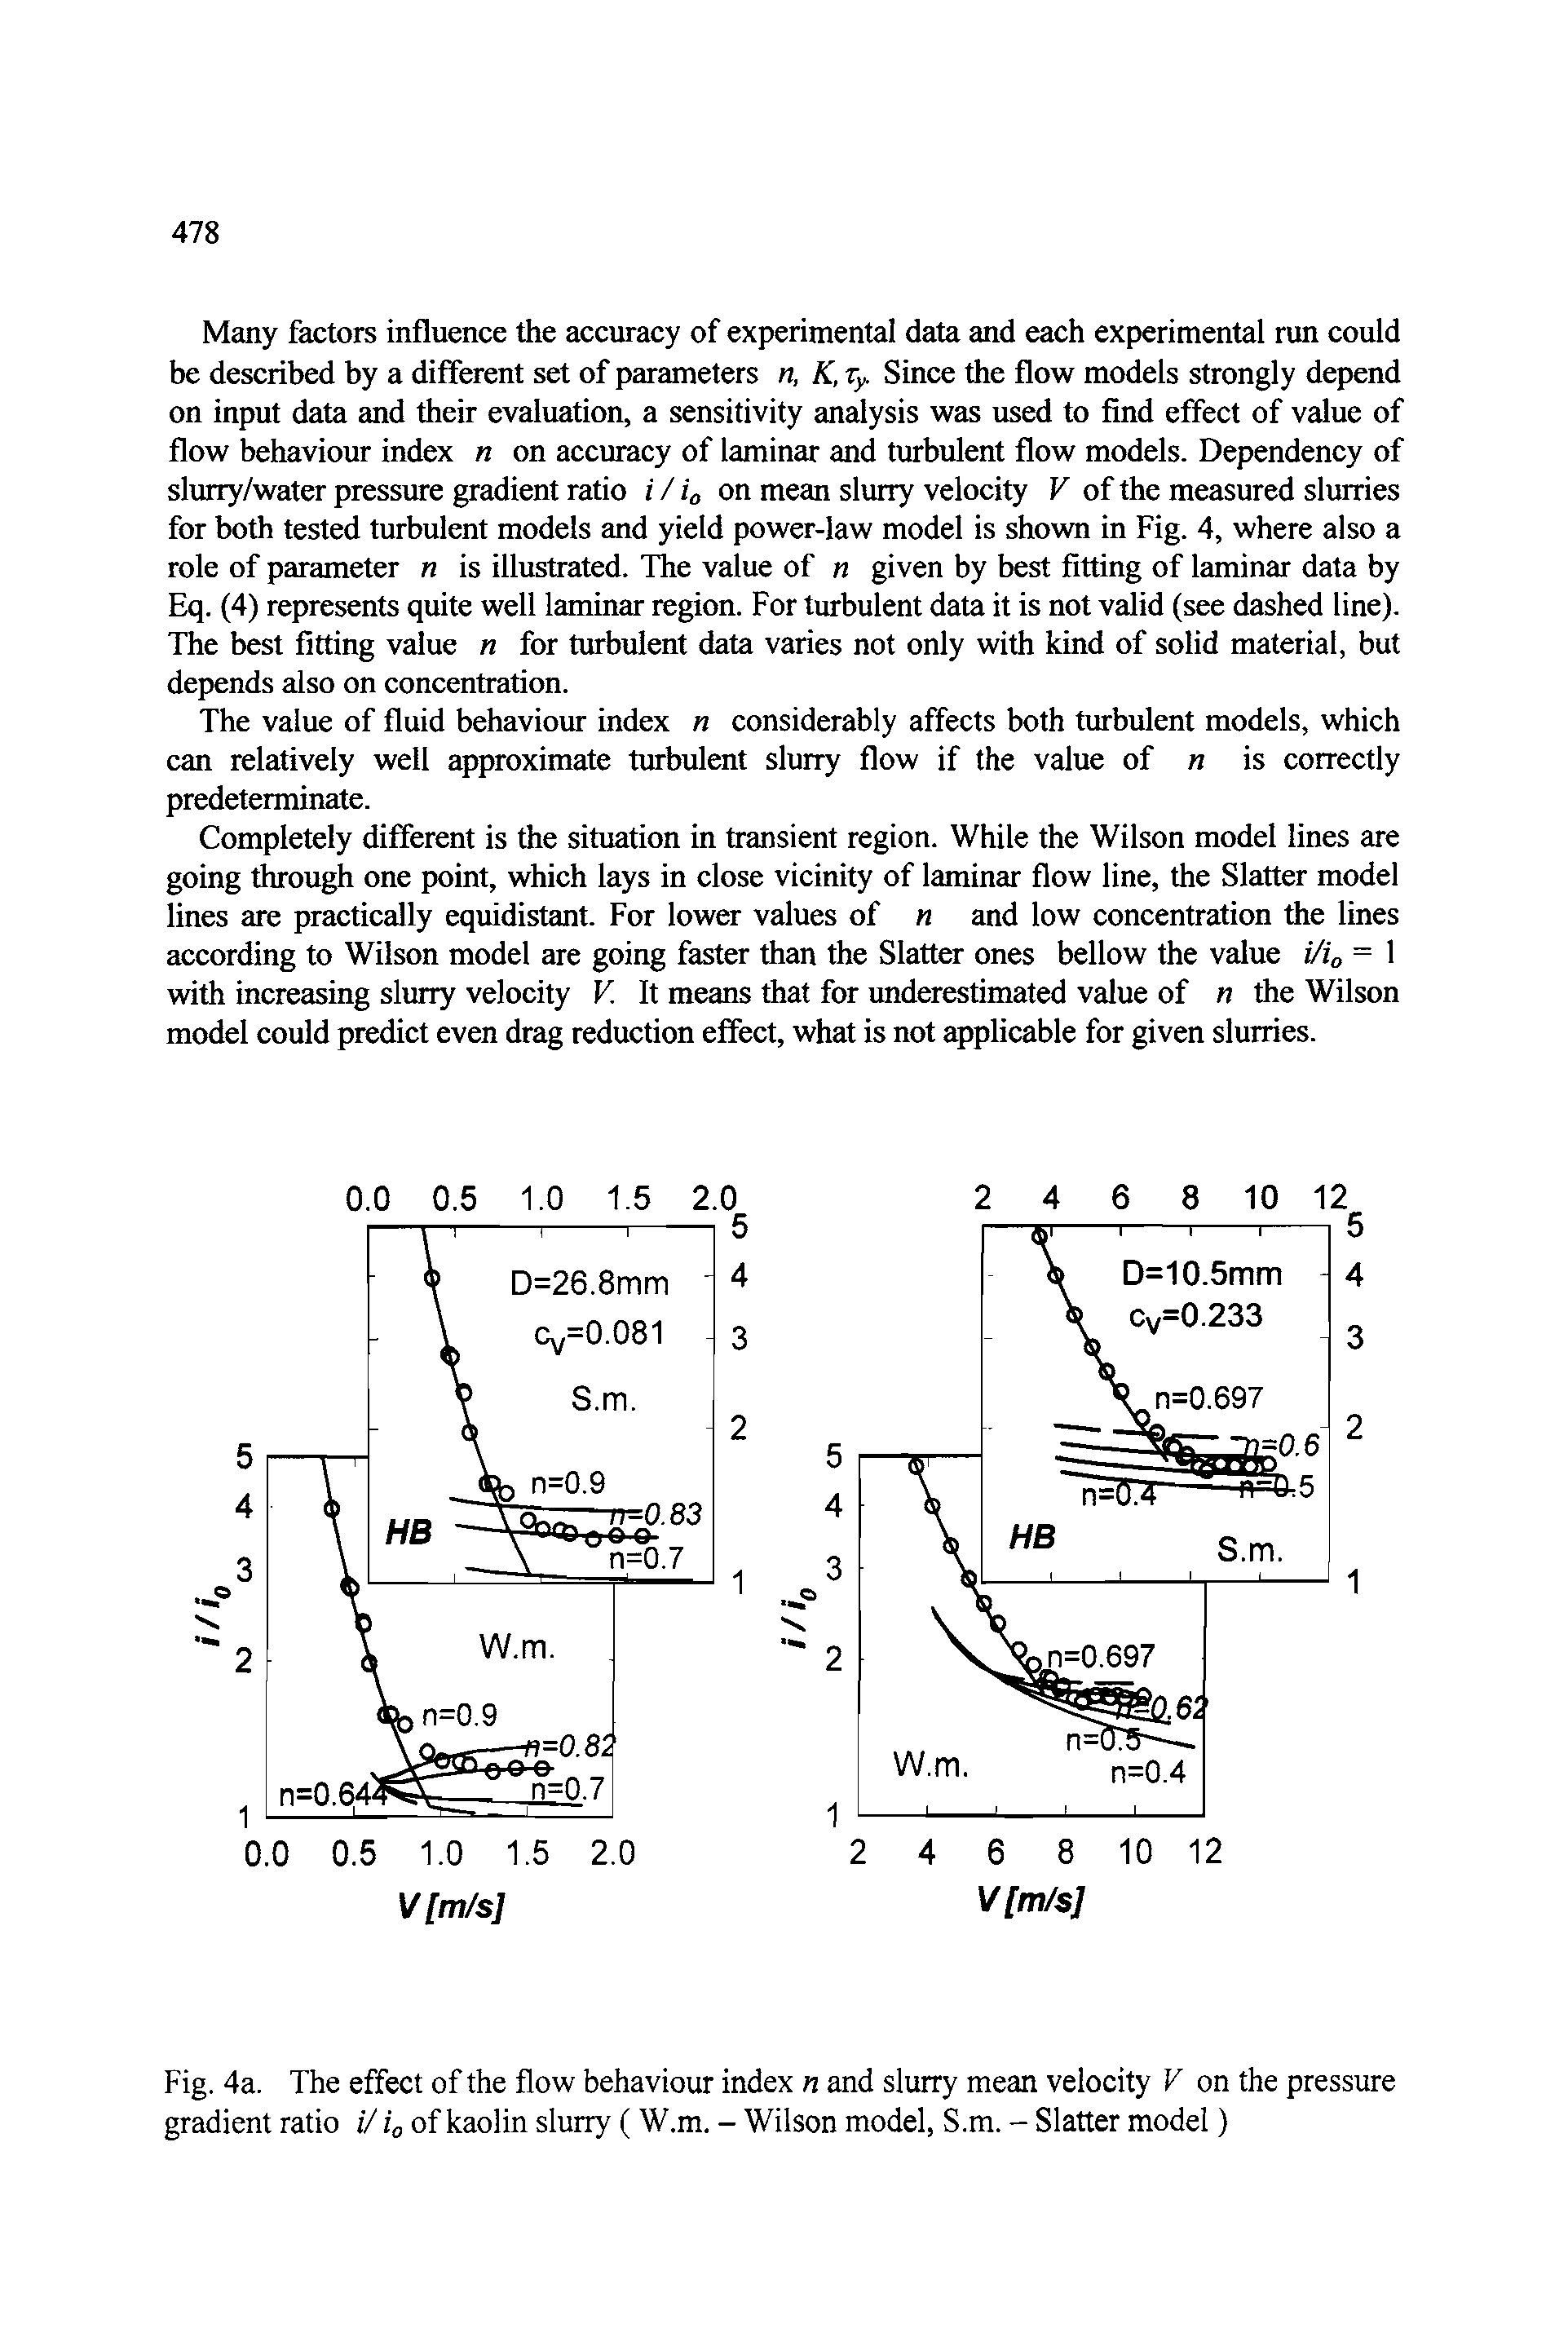 Fig. 4a. The effect of the flow behaviour index n and slurry mean velocity V on the pressure gradient ratio // ig of kaolin slurry (W.m. - Wilson model, S.m. - Slatter model)...